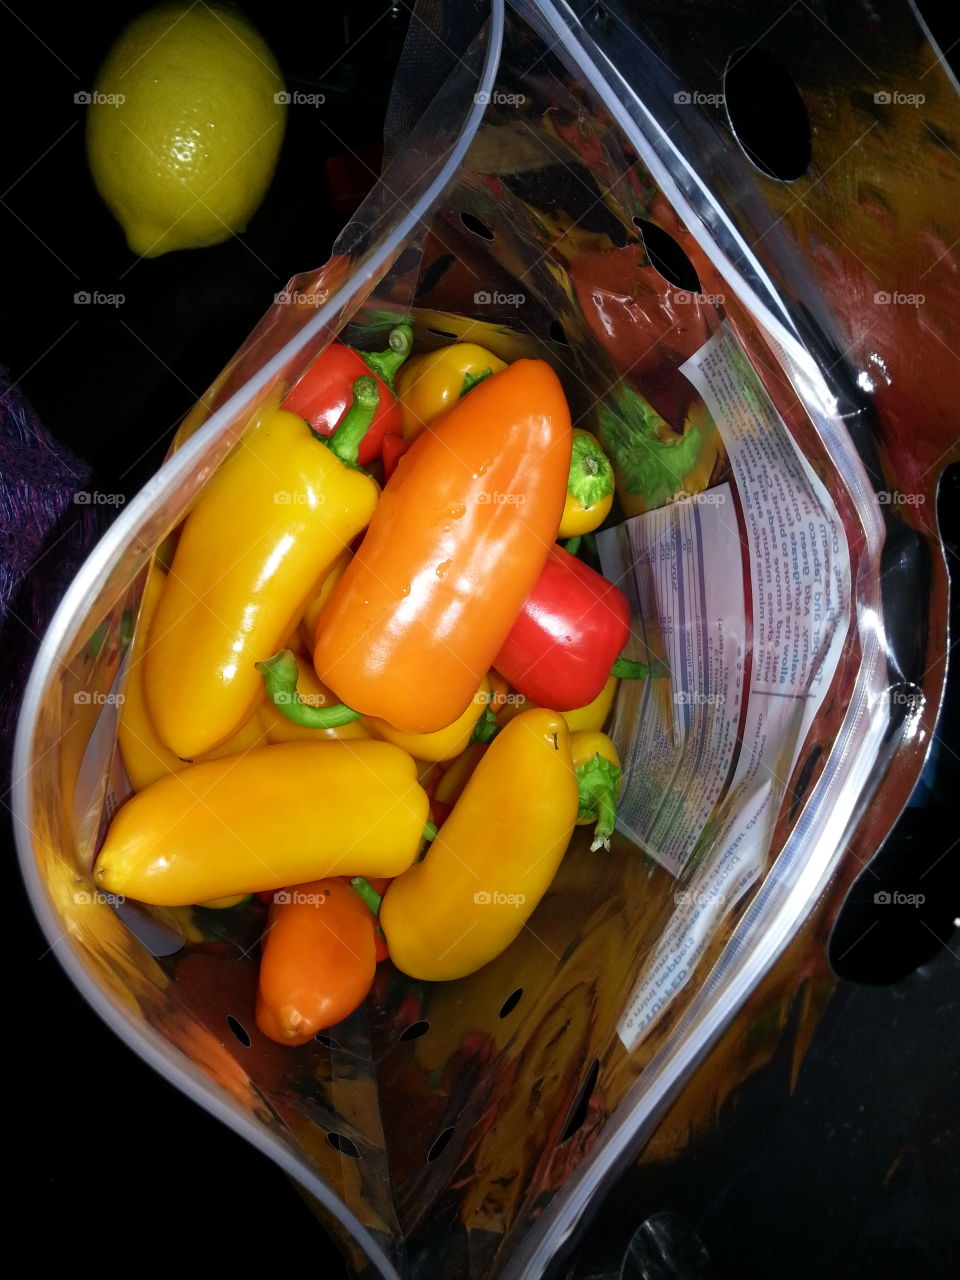 Bag of Peppers. Peppers come in different shapes, sizes, and colors